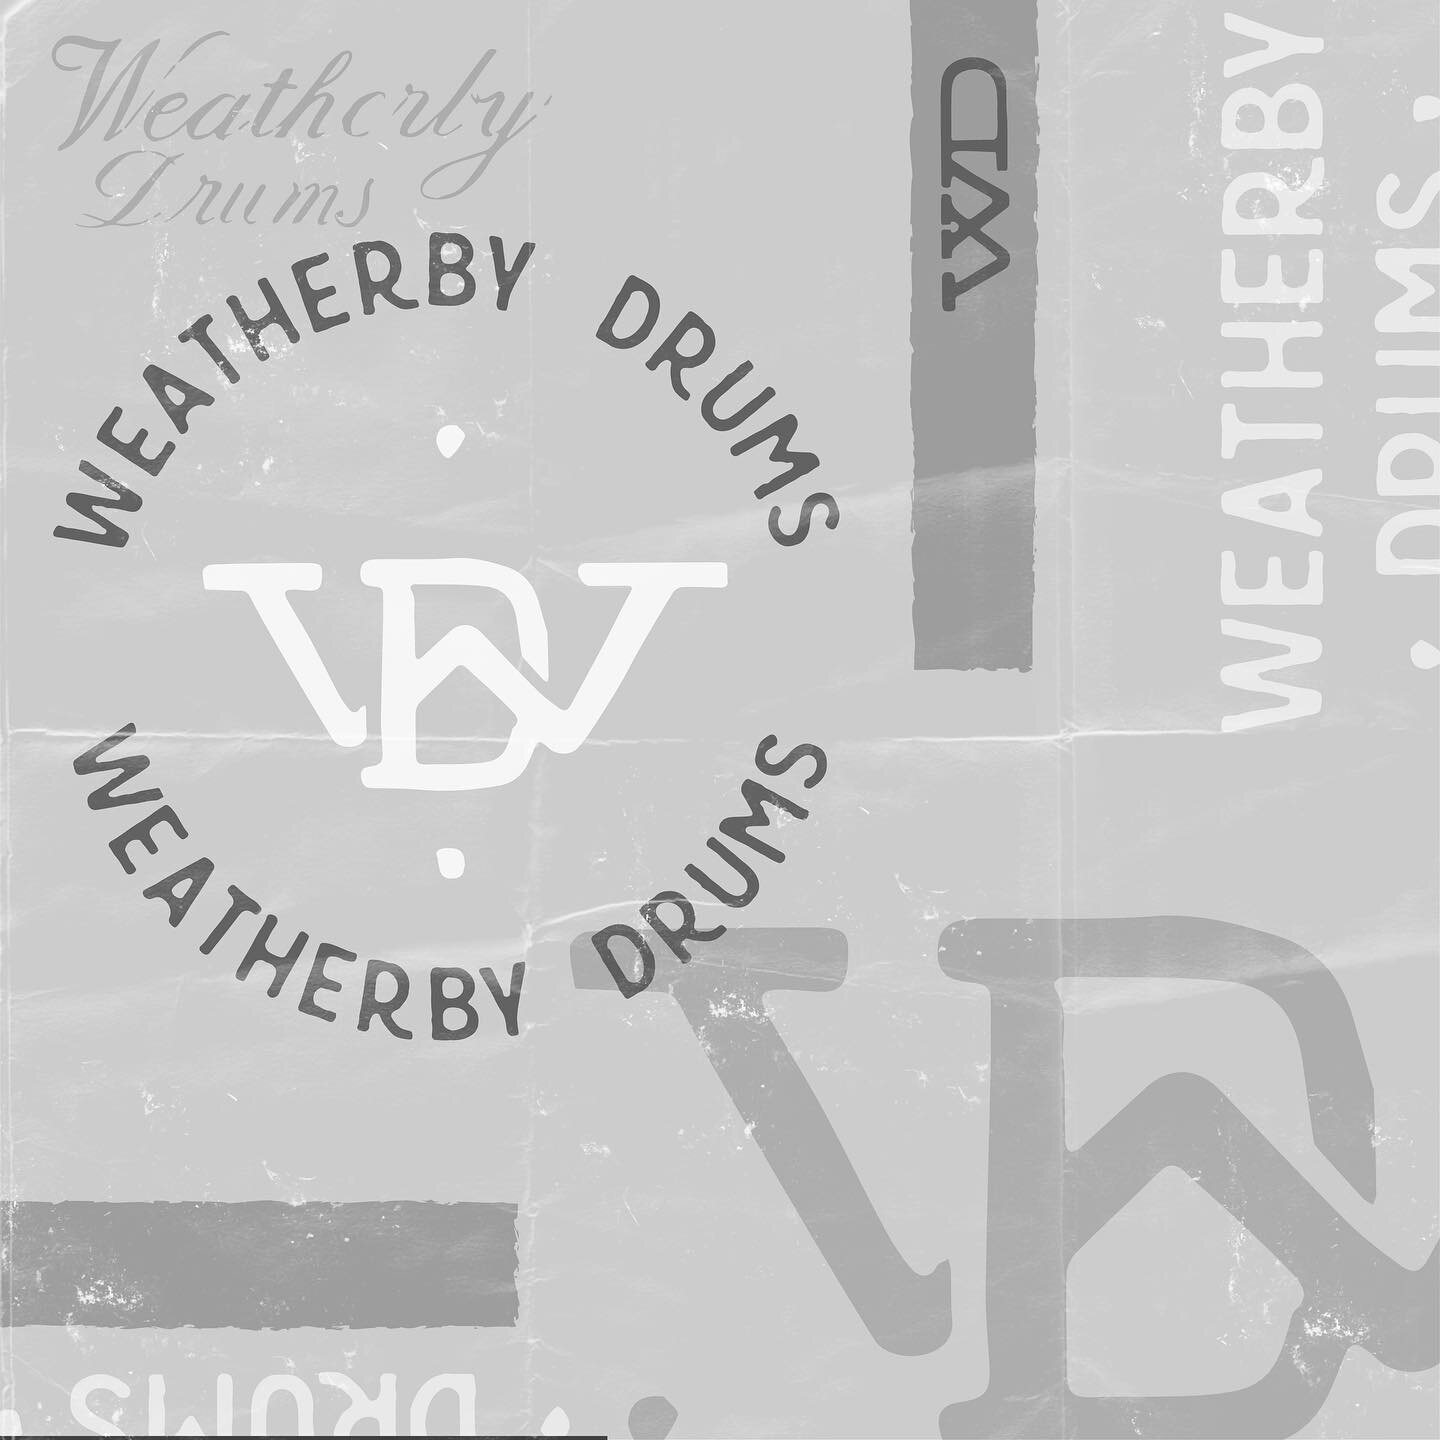 Something I&rsquo;m workin on for my bud @weatherbydrums. Go check him out if you need custom builds, repairs, or restorations.
. . . .
. .
. .
#branding #worldpackagingdesign #thedieline #brandidentity #identity #graphicdesign #illustration  #illust